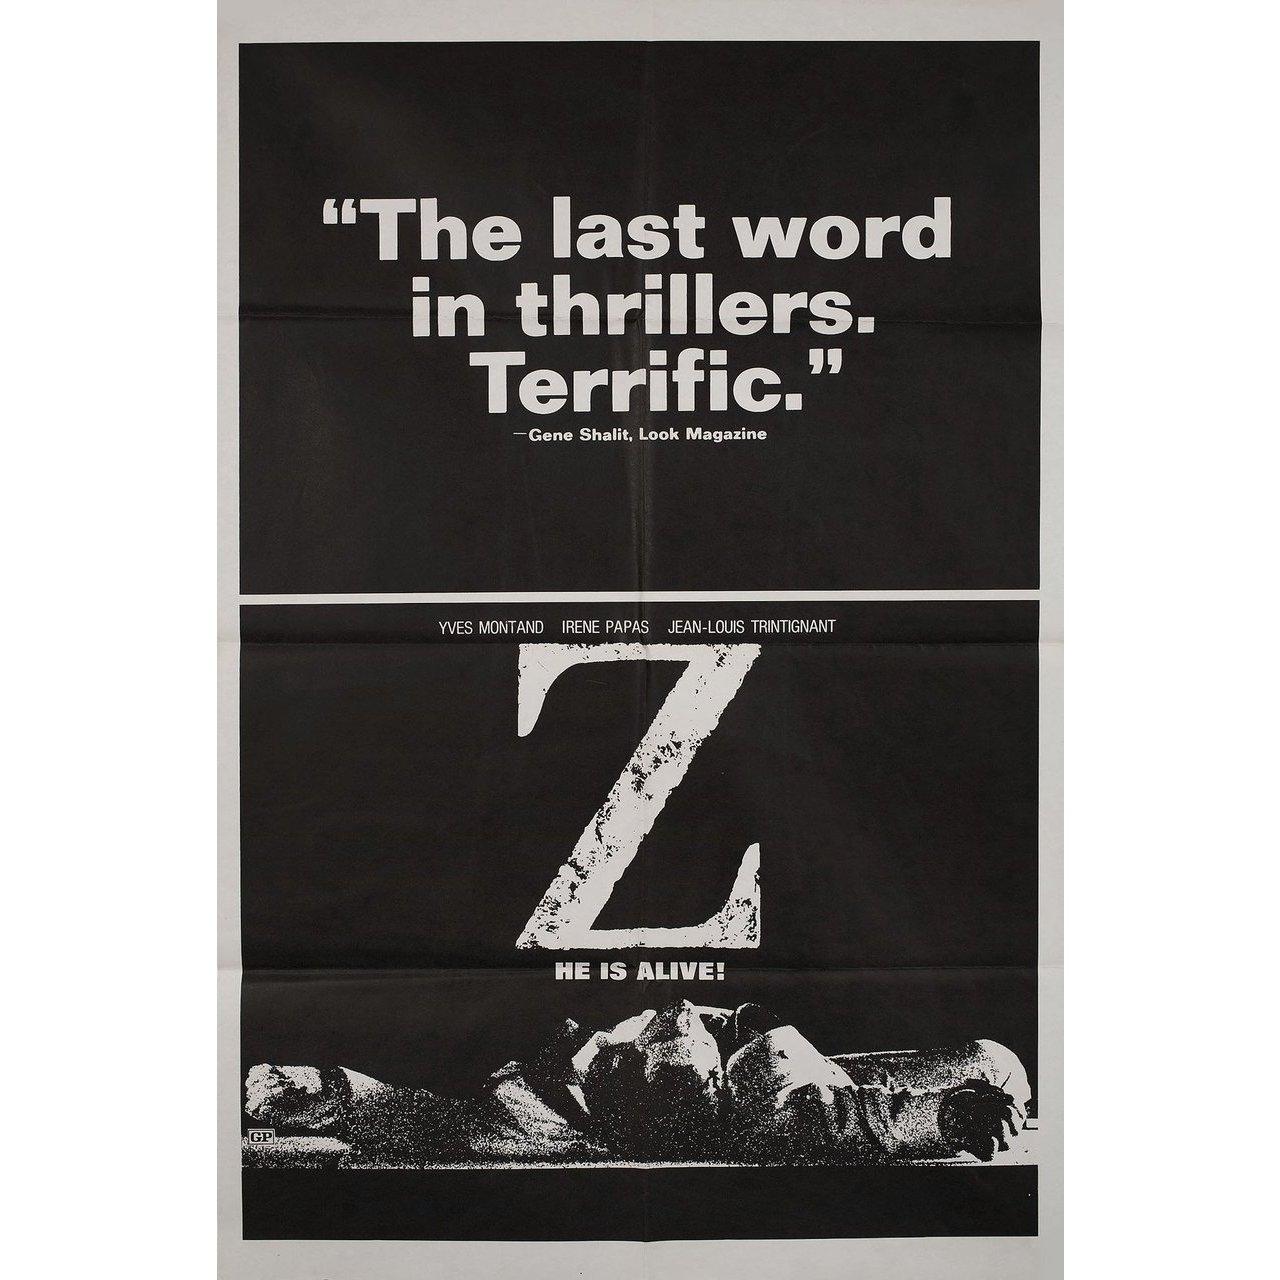 Original 1969 U.S. one sheet poster for the film Z directed by Costa-Gavras with Yves Montand / Irene Papas / Jean-Louis Trintignant / Jacques Perrin. Fine condition, folded. Many original posters were issued folded or were subsequently folded.